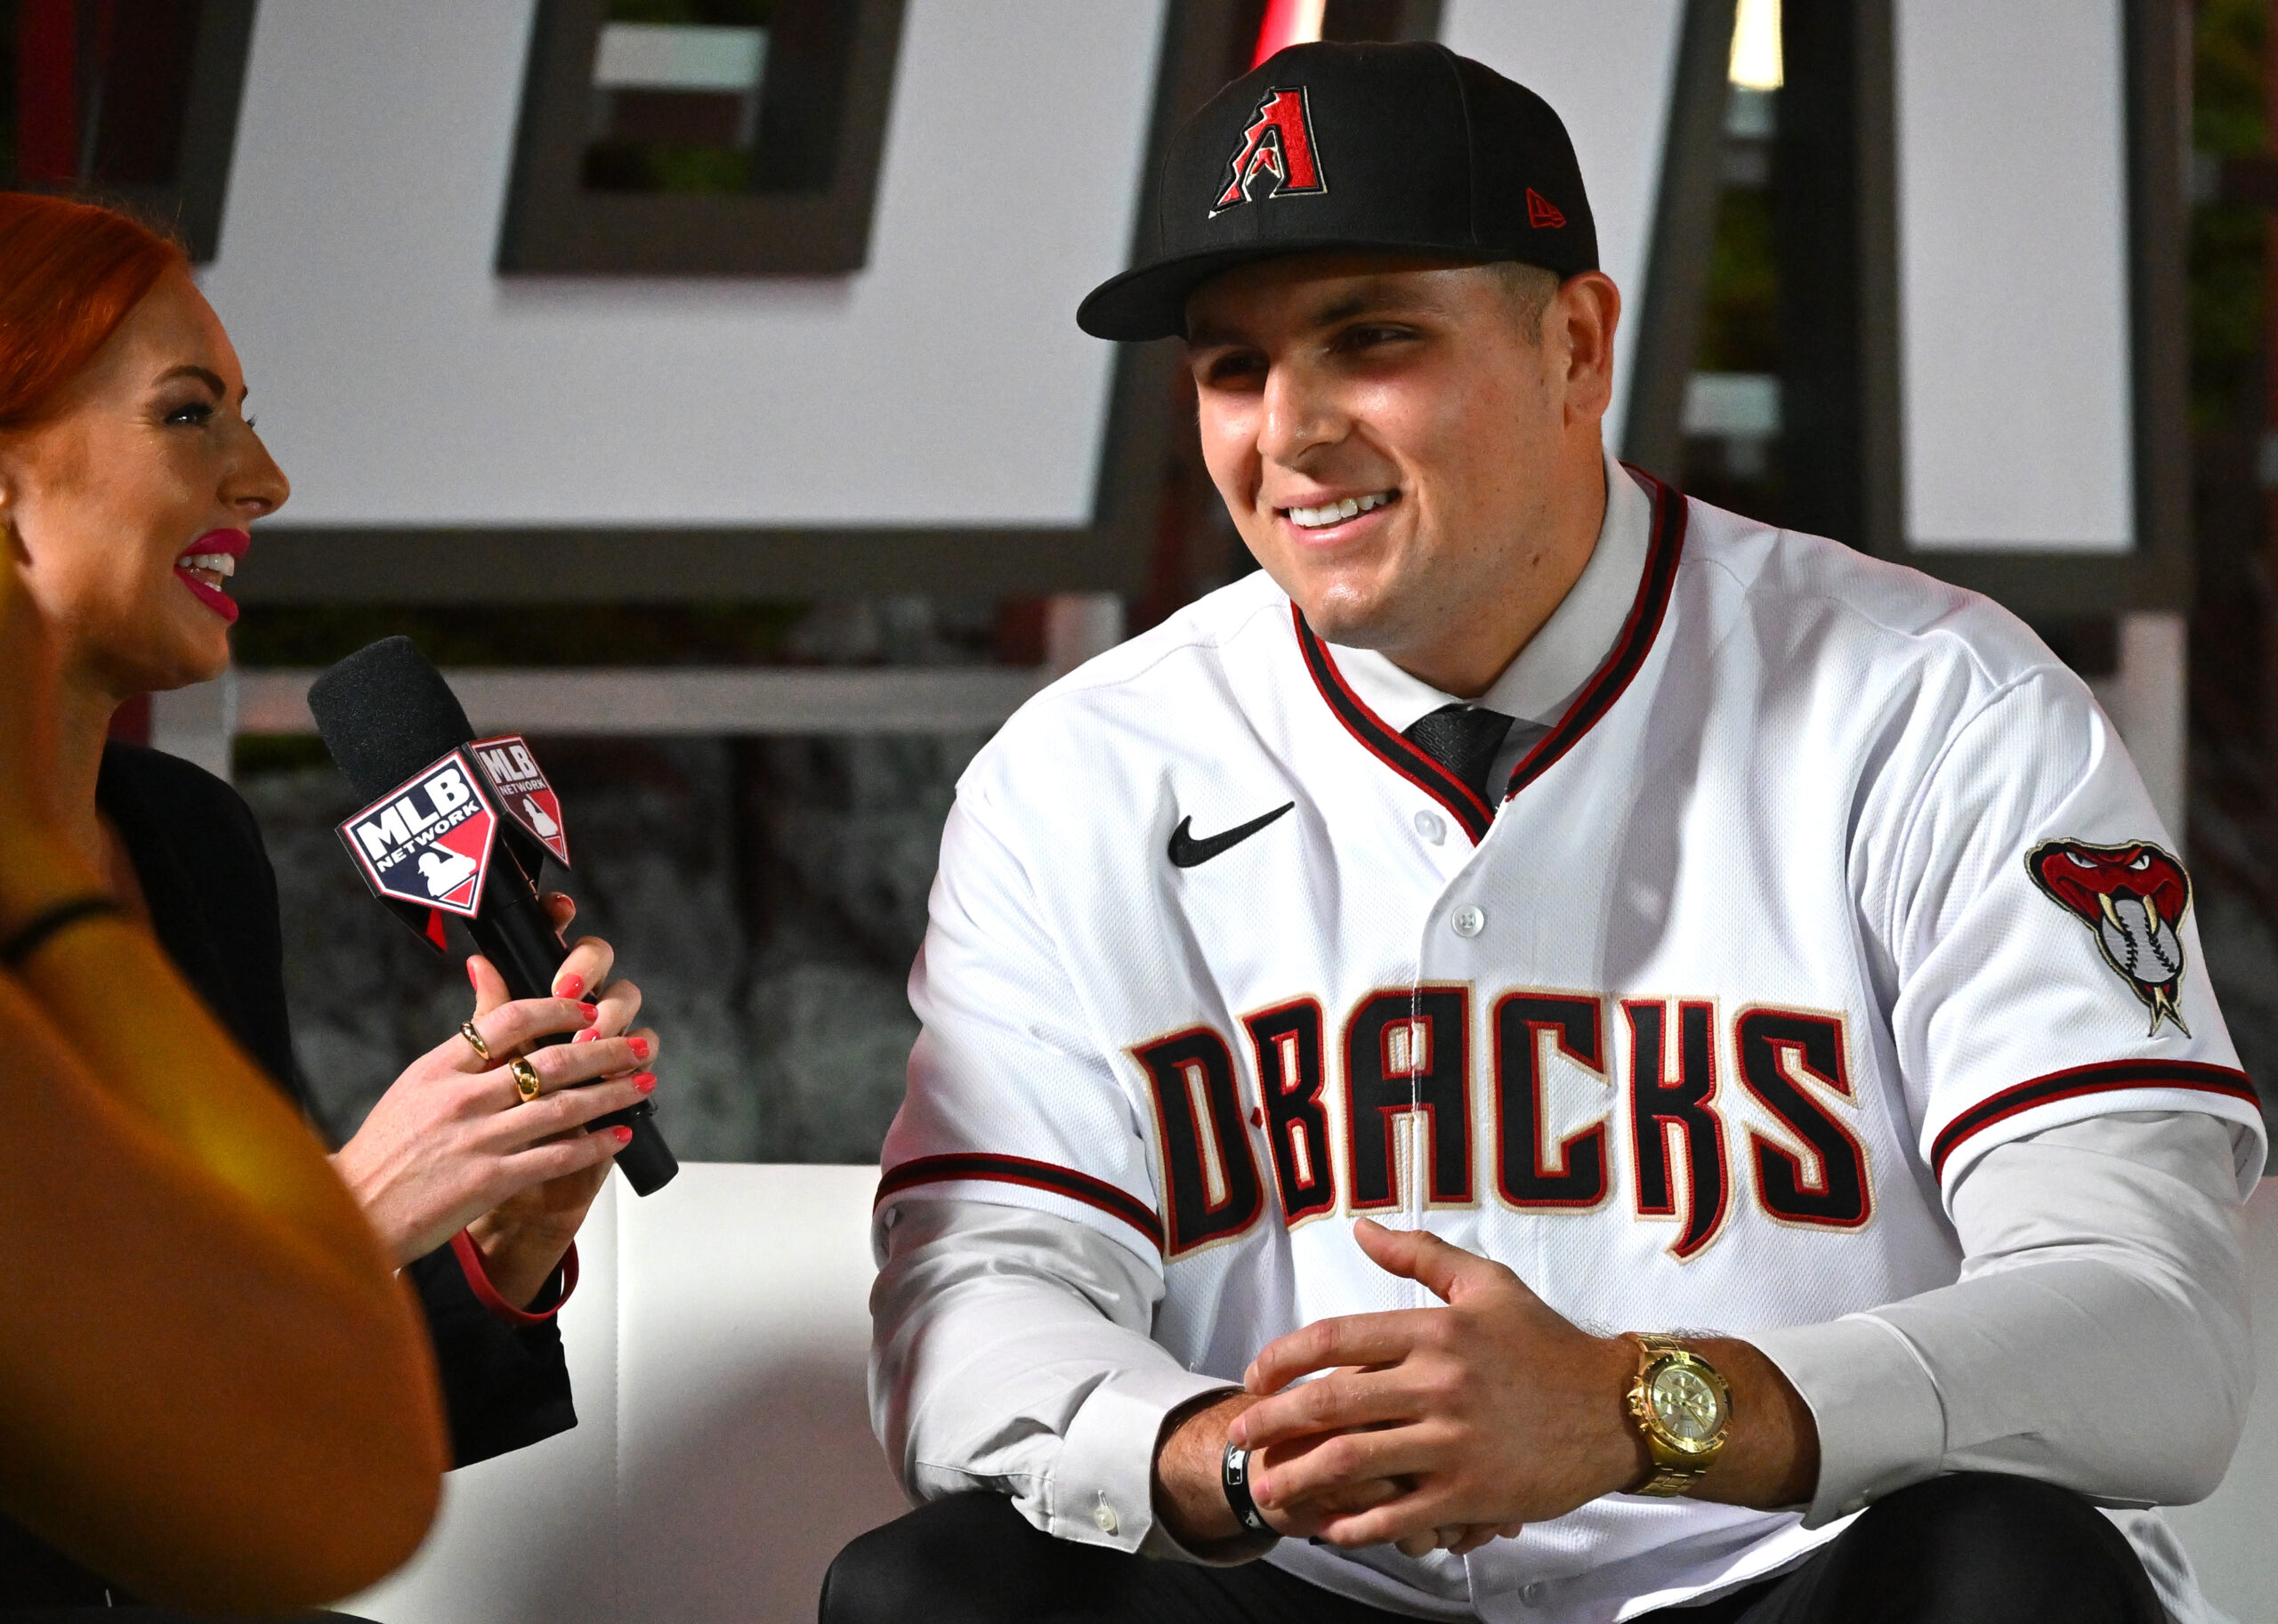  Ivan Melendez is interviewed by Lauren Gardner of MLB Network after he was selected by the Arizona Diamondbacks as the 43rd pick of the MLB draft at XBox Plaza at LA Live.